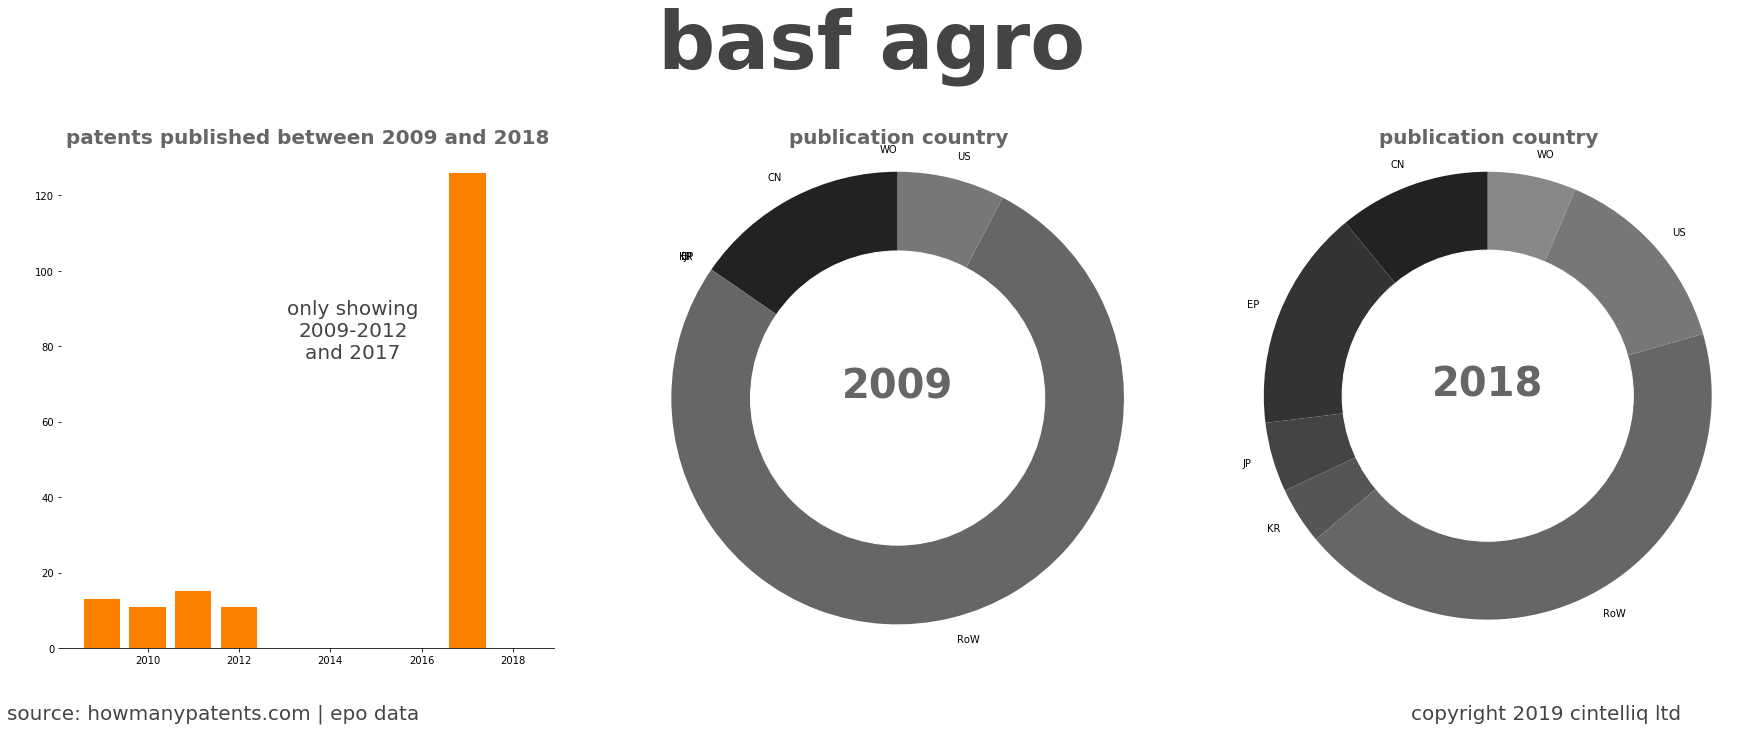 summary of patents for Basf Agro